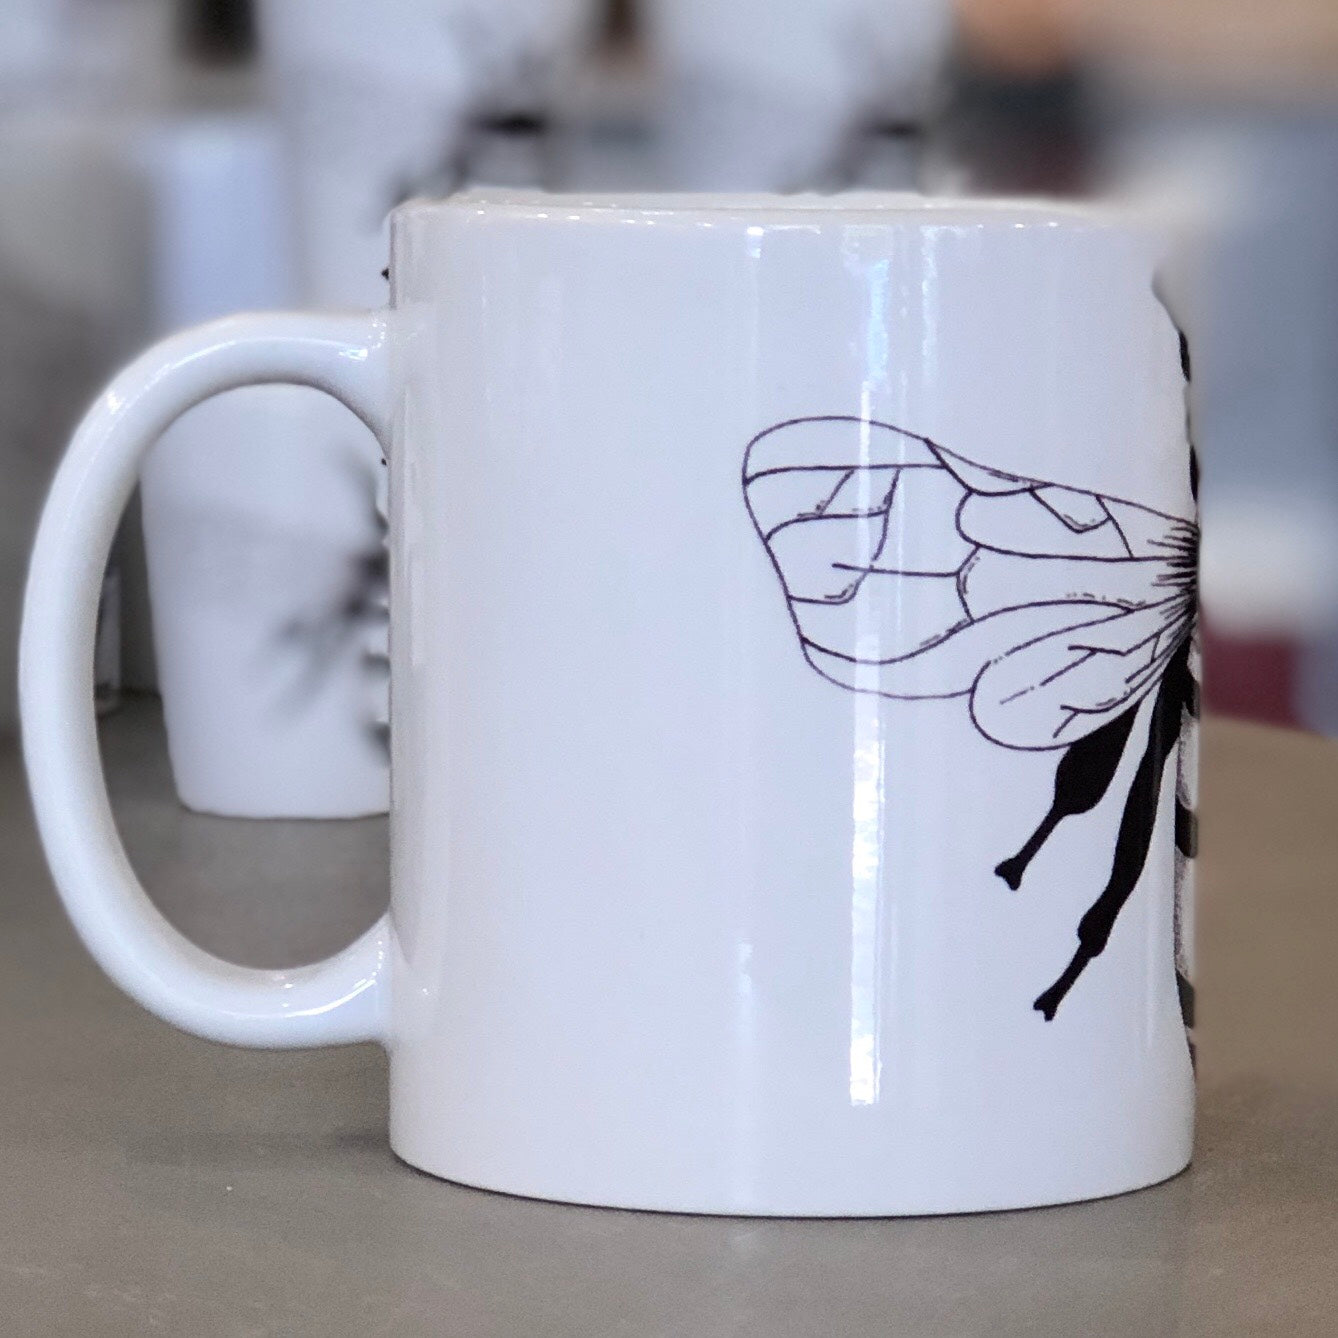 A large white mug with a black bee design pictured from the side. This is a Large Mug by Birds & Bees sold at The Hare & The Hart.